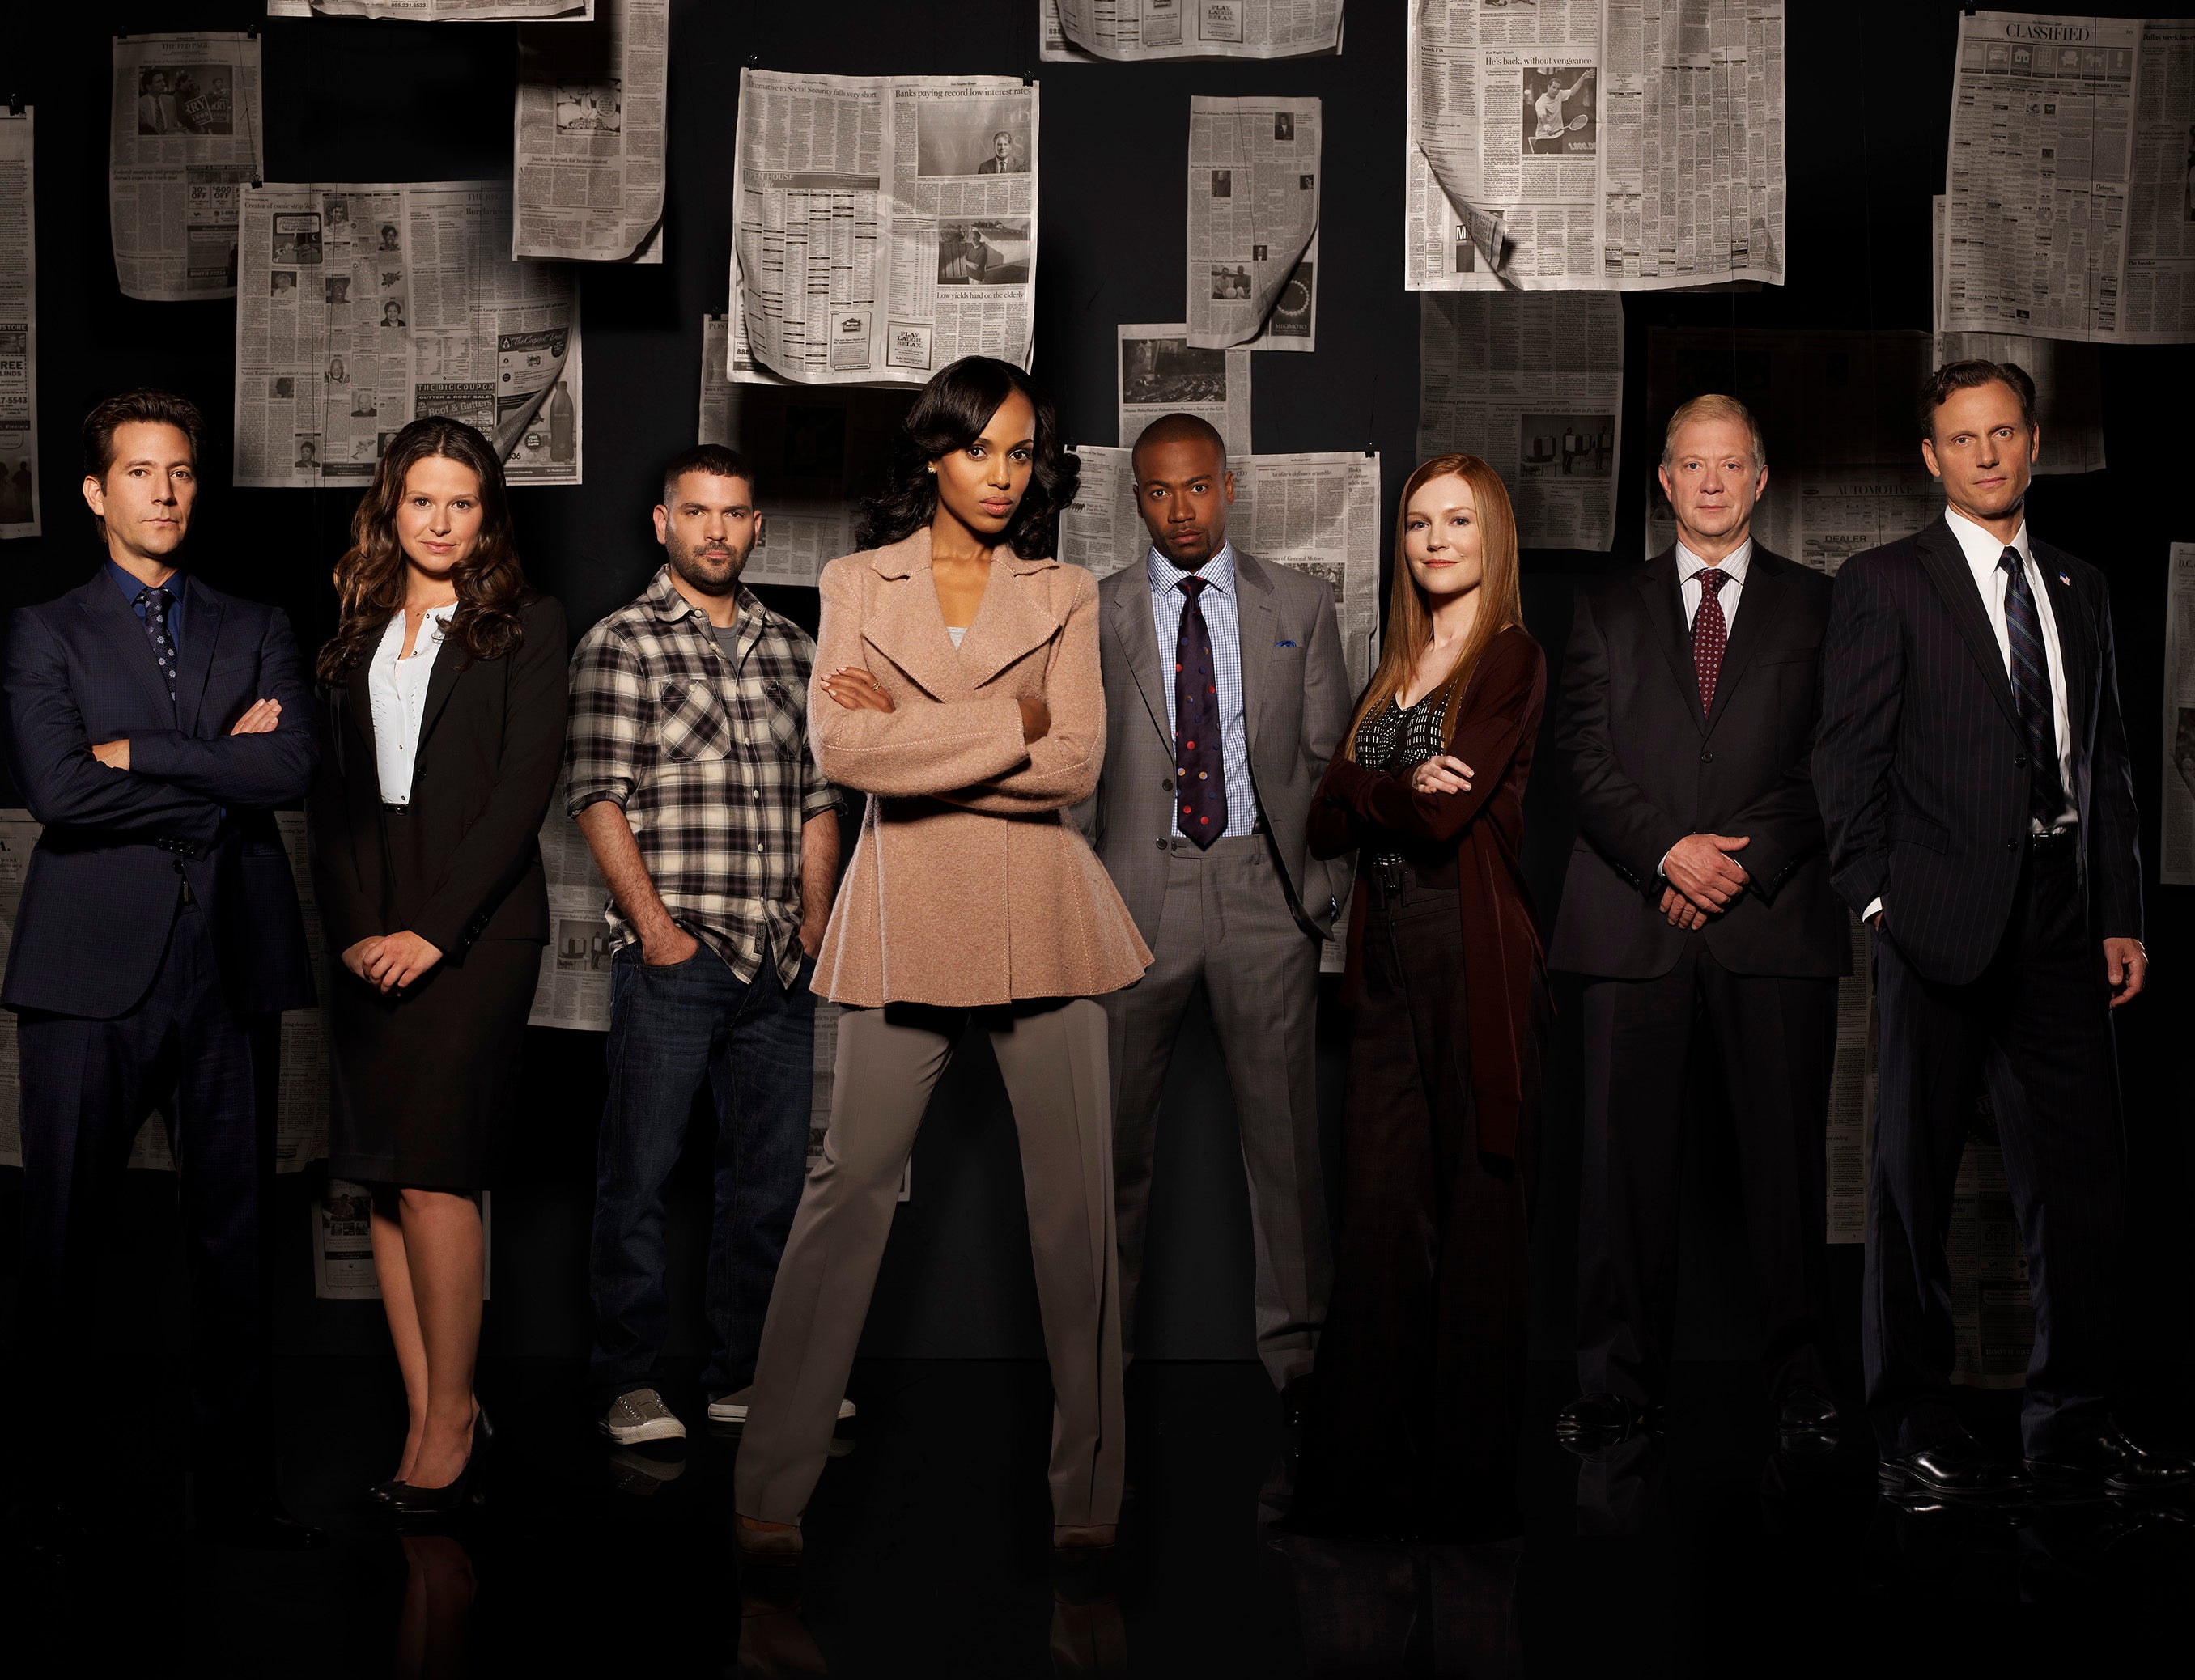 ABC's 'Scandal' stars Henry Ian Cusick as Stephen Finch, Katie Lowes as Quinn Perkins, Guillermo Diaz as Huck, Kerry Washington as Olivia Pope, Columbus Short as Harrison Wright, Darby Stanchfield as Abby Whelan, Jeff Perry as Cyrus and Tony Goldwyn as Pr